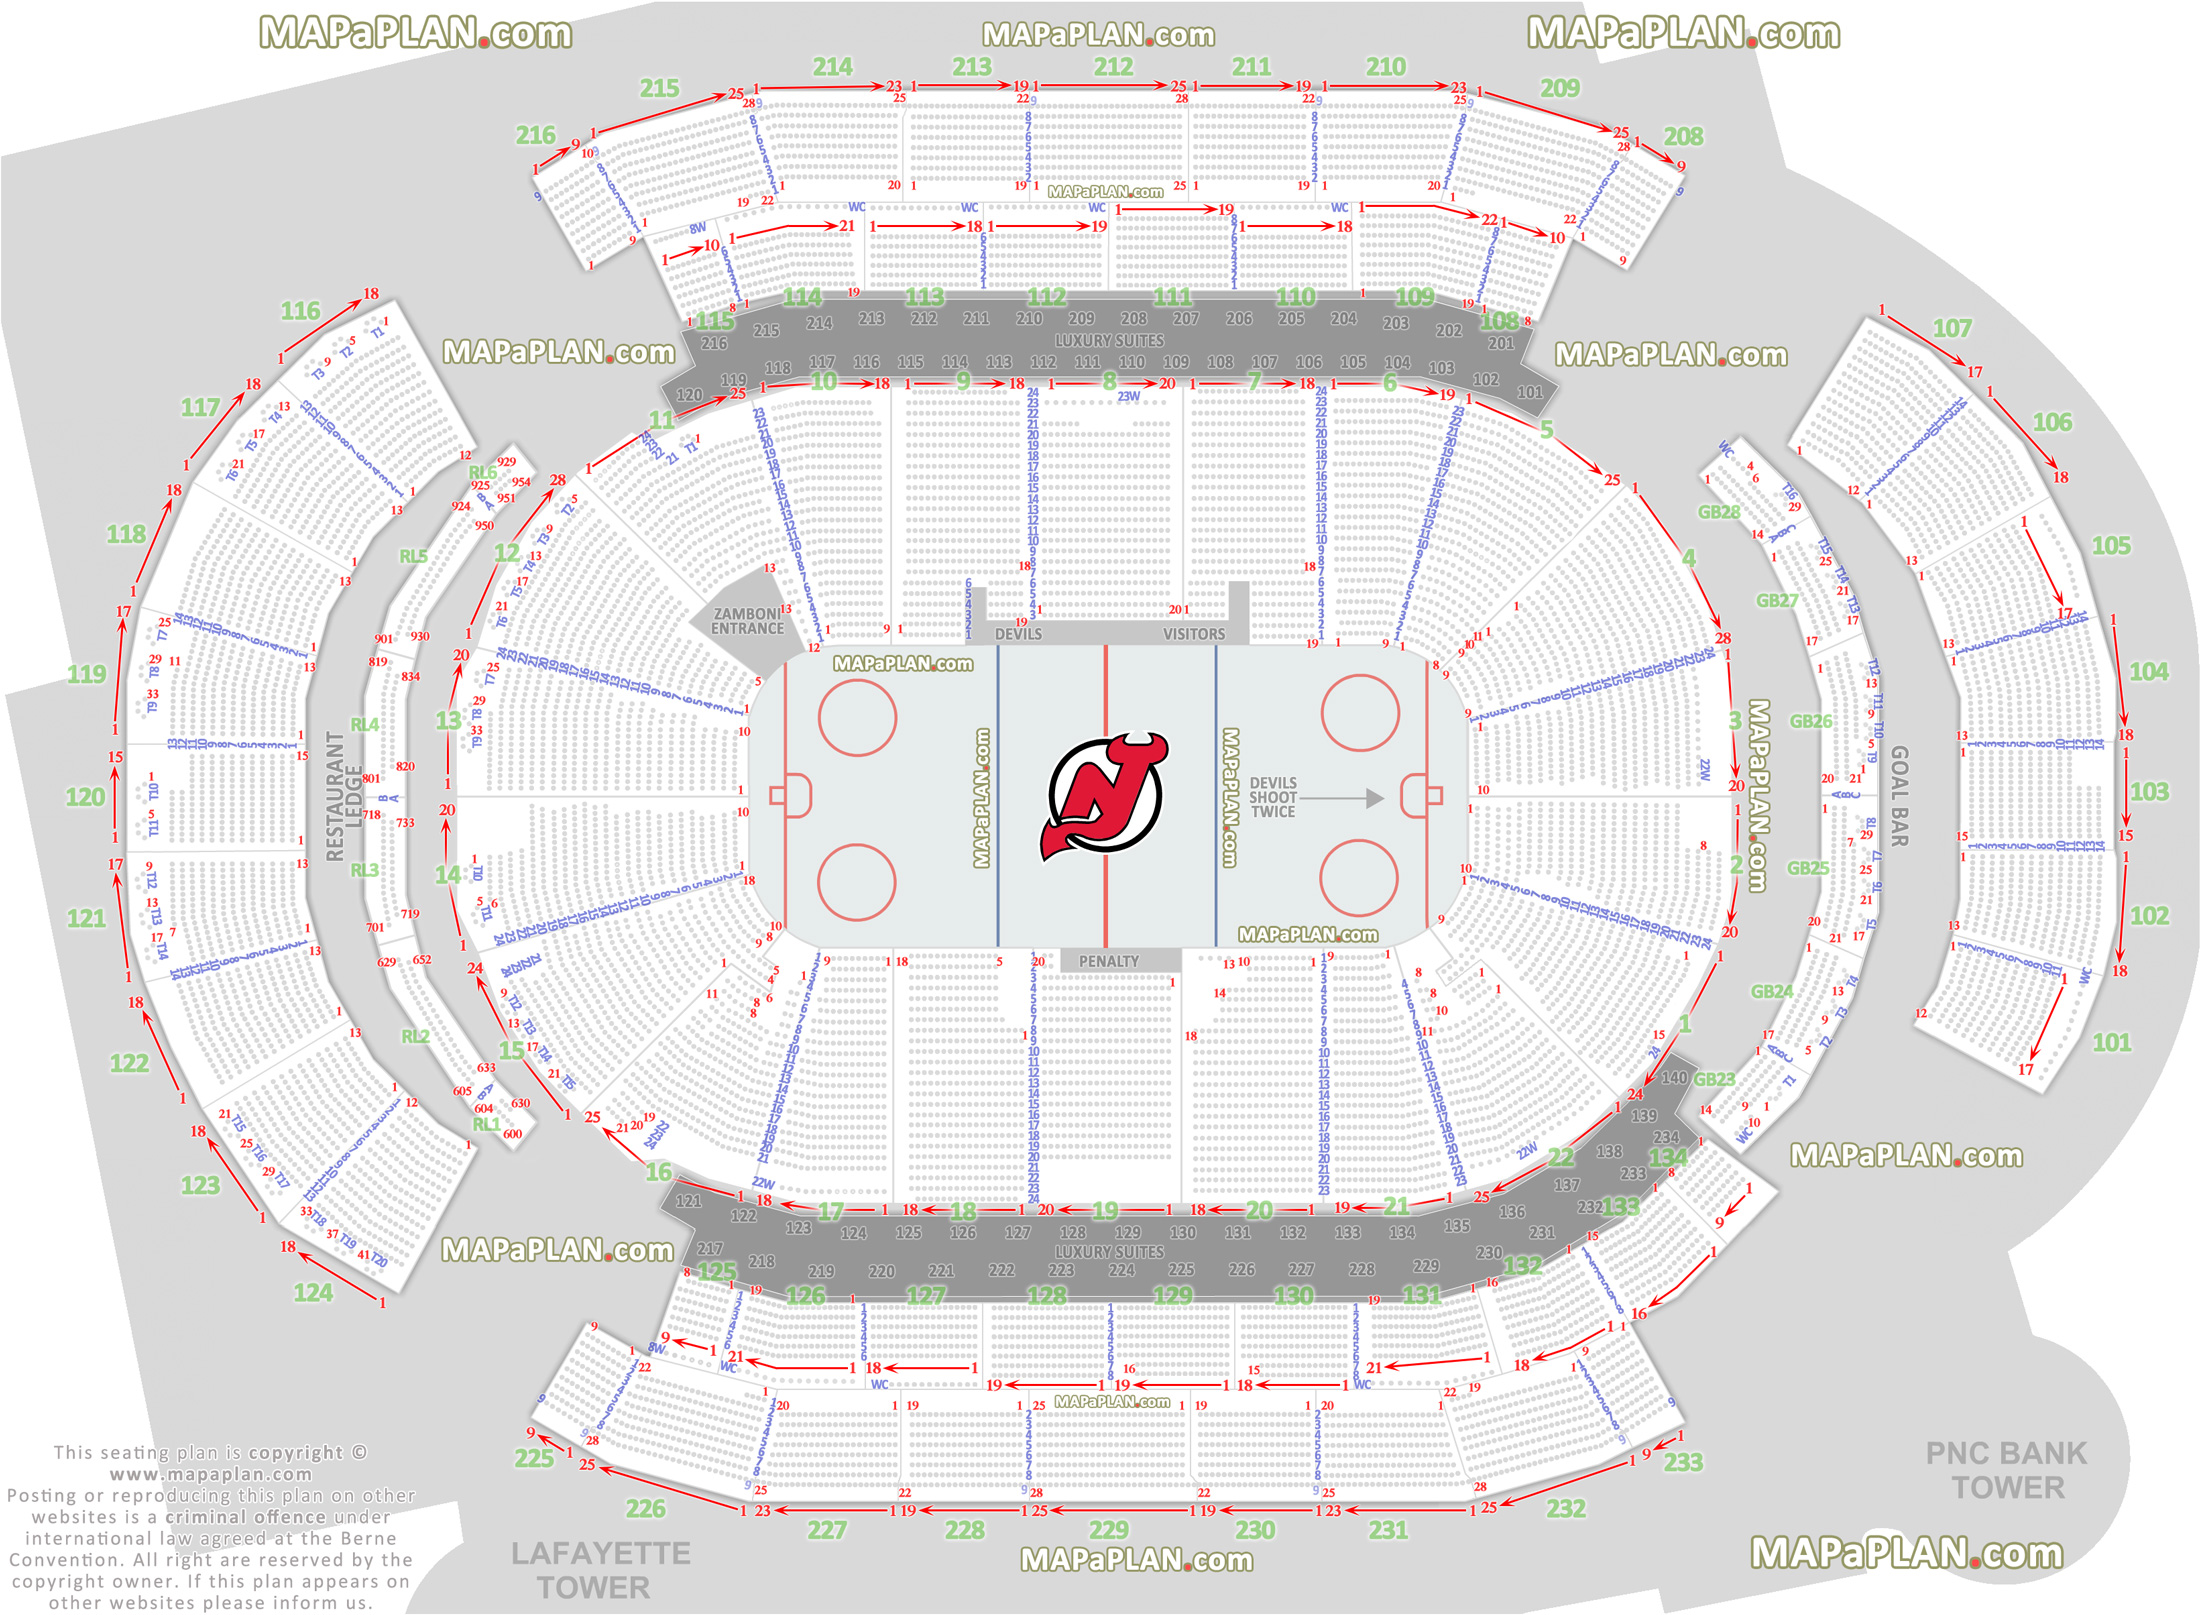 detailed seat row numbers new jersey devils hockey plan with lower upper levels layout Newark Prudential Center seating chart